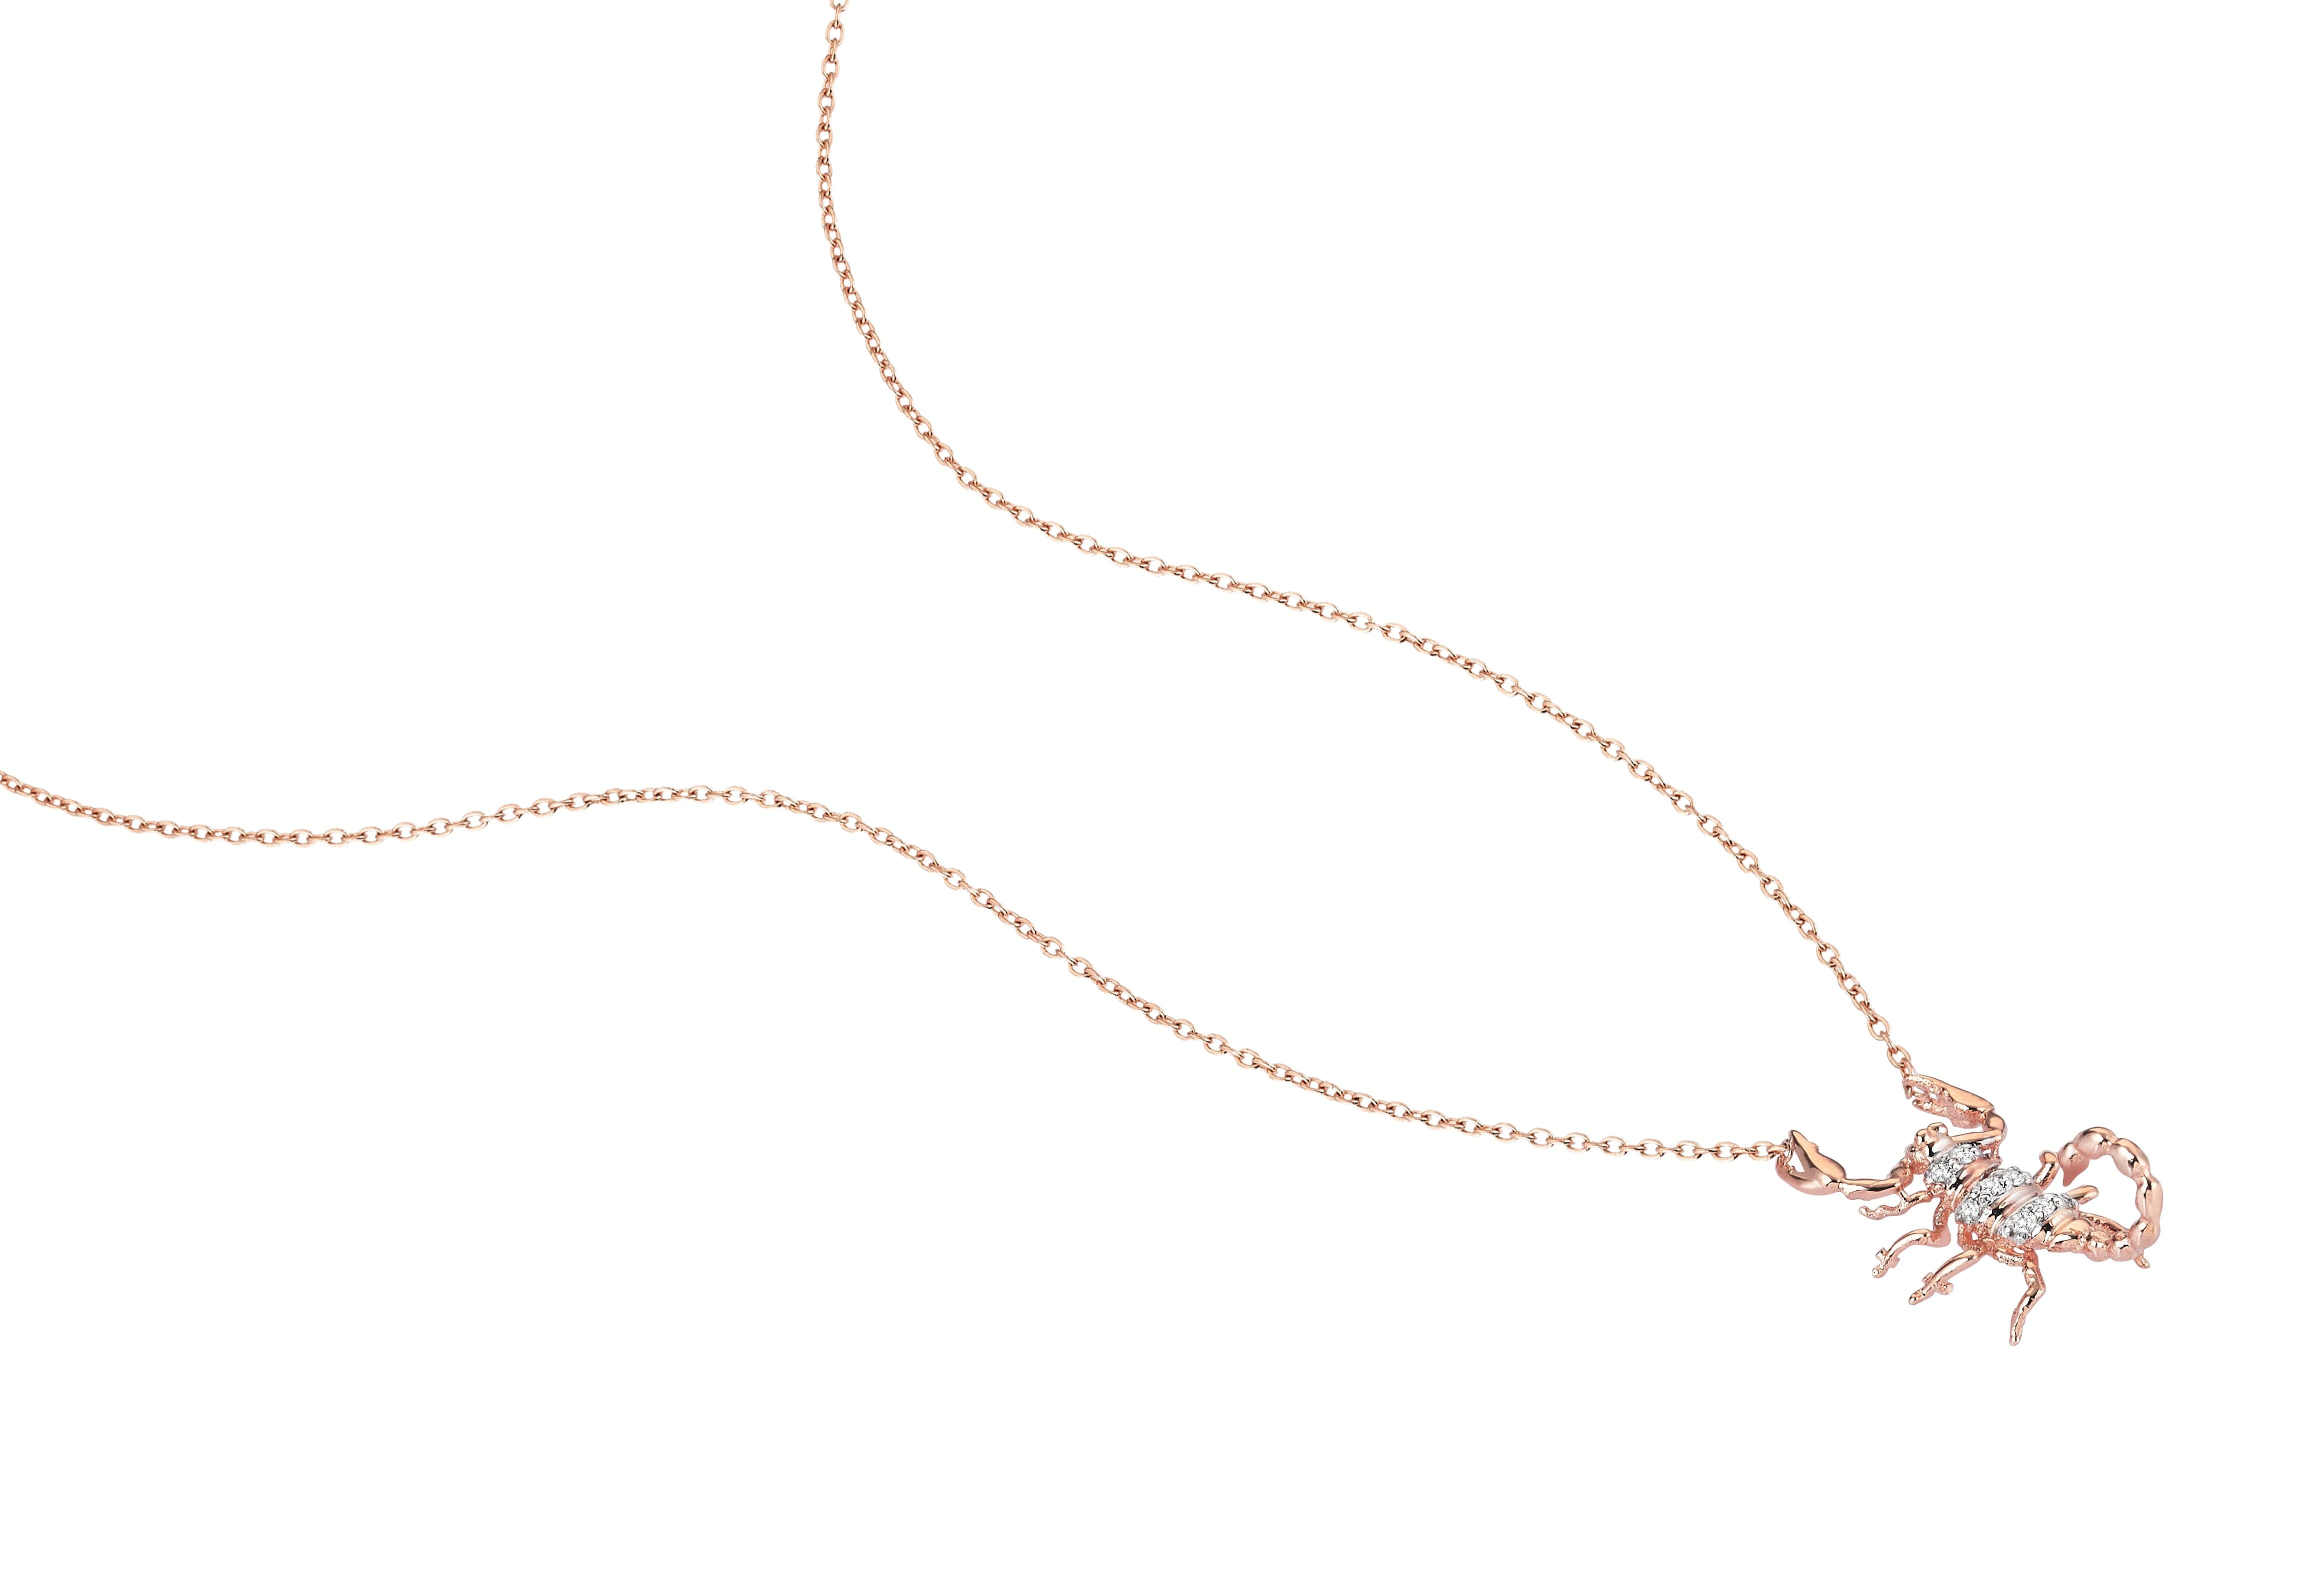 Scorpion Necklace in Rose Gold - Her Story Shop